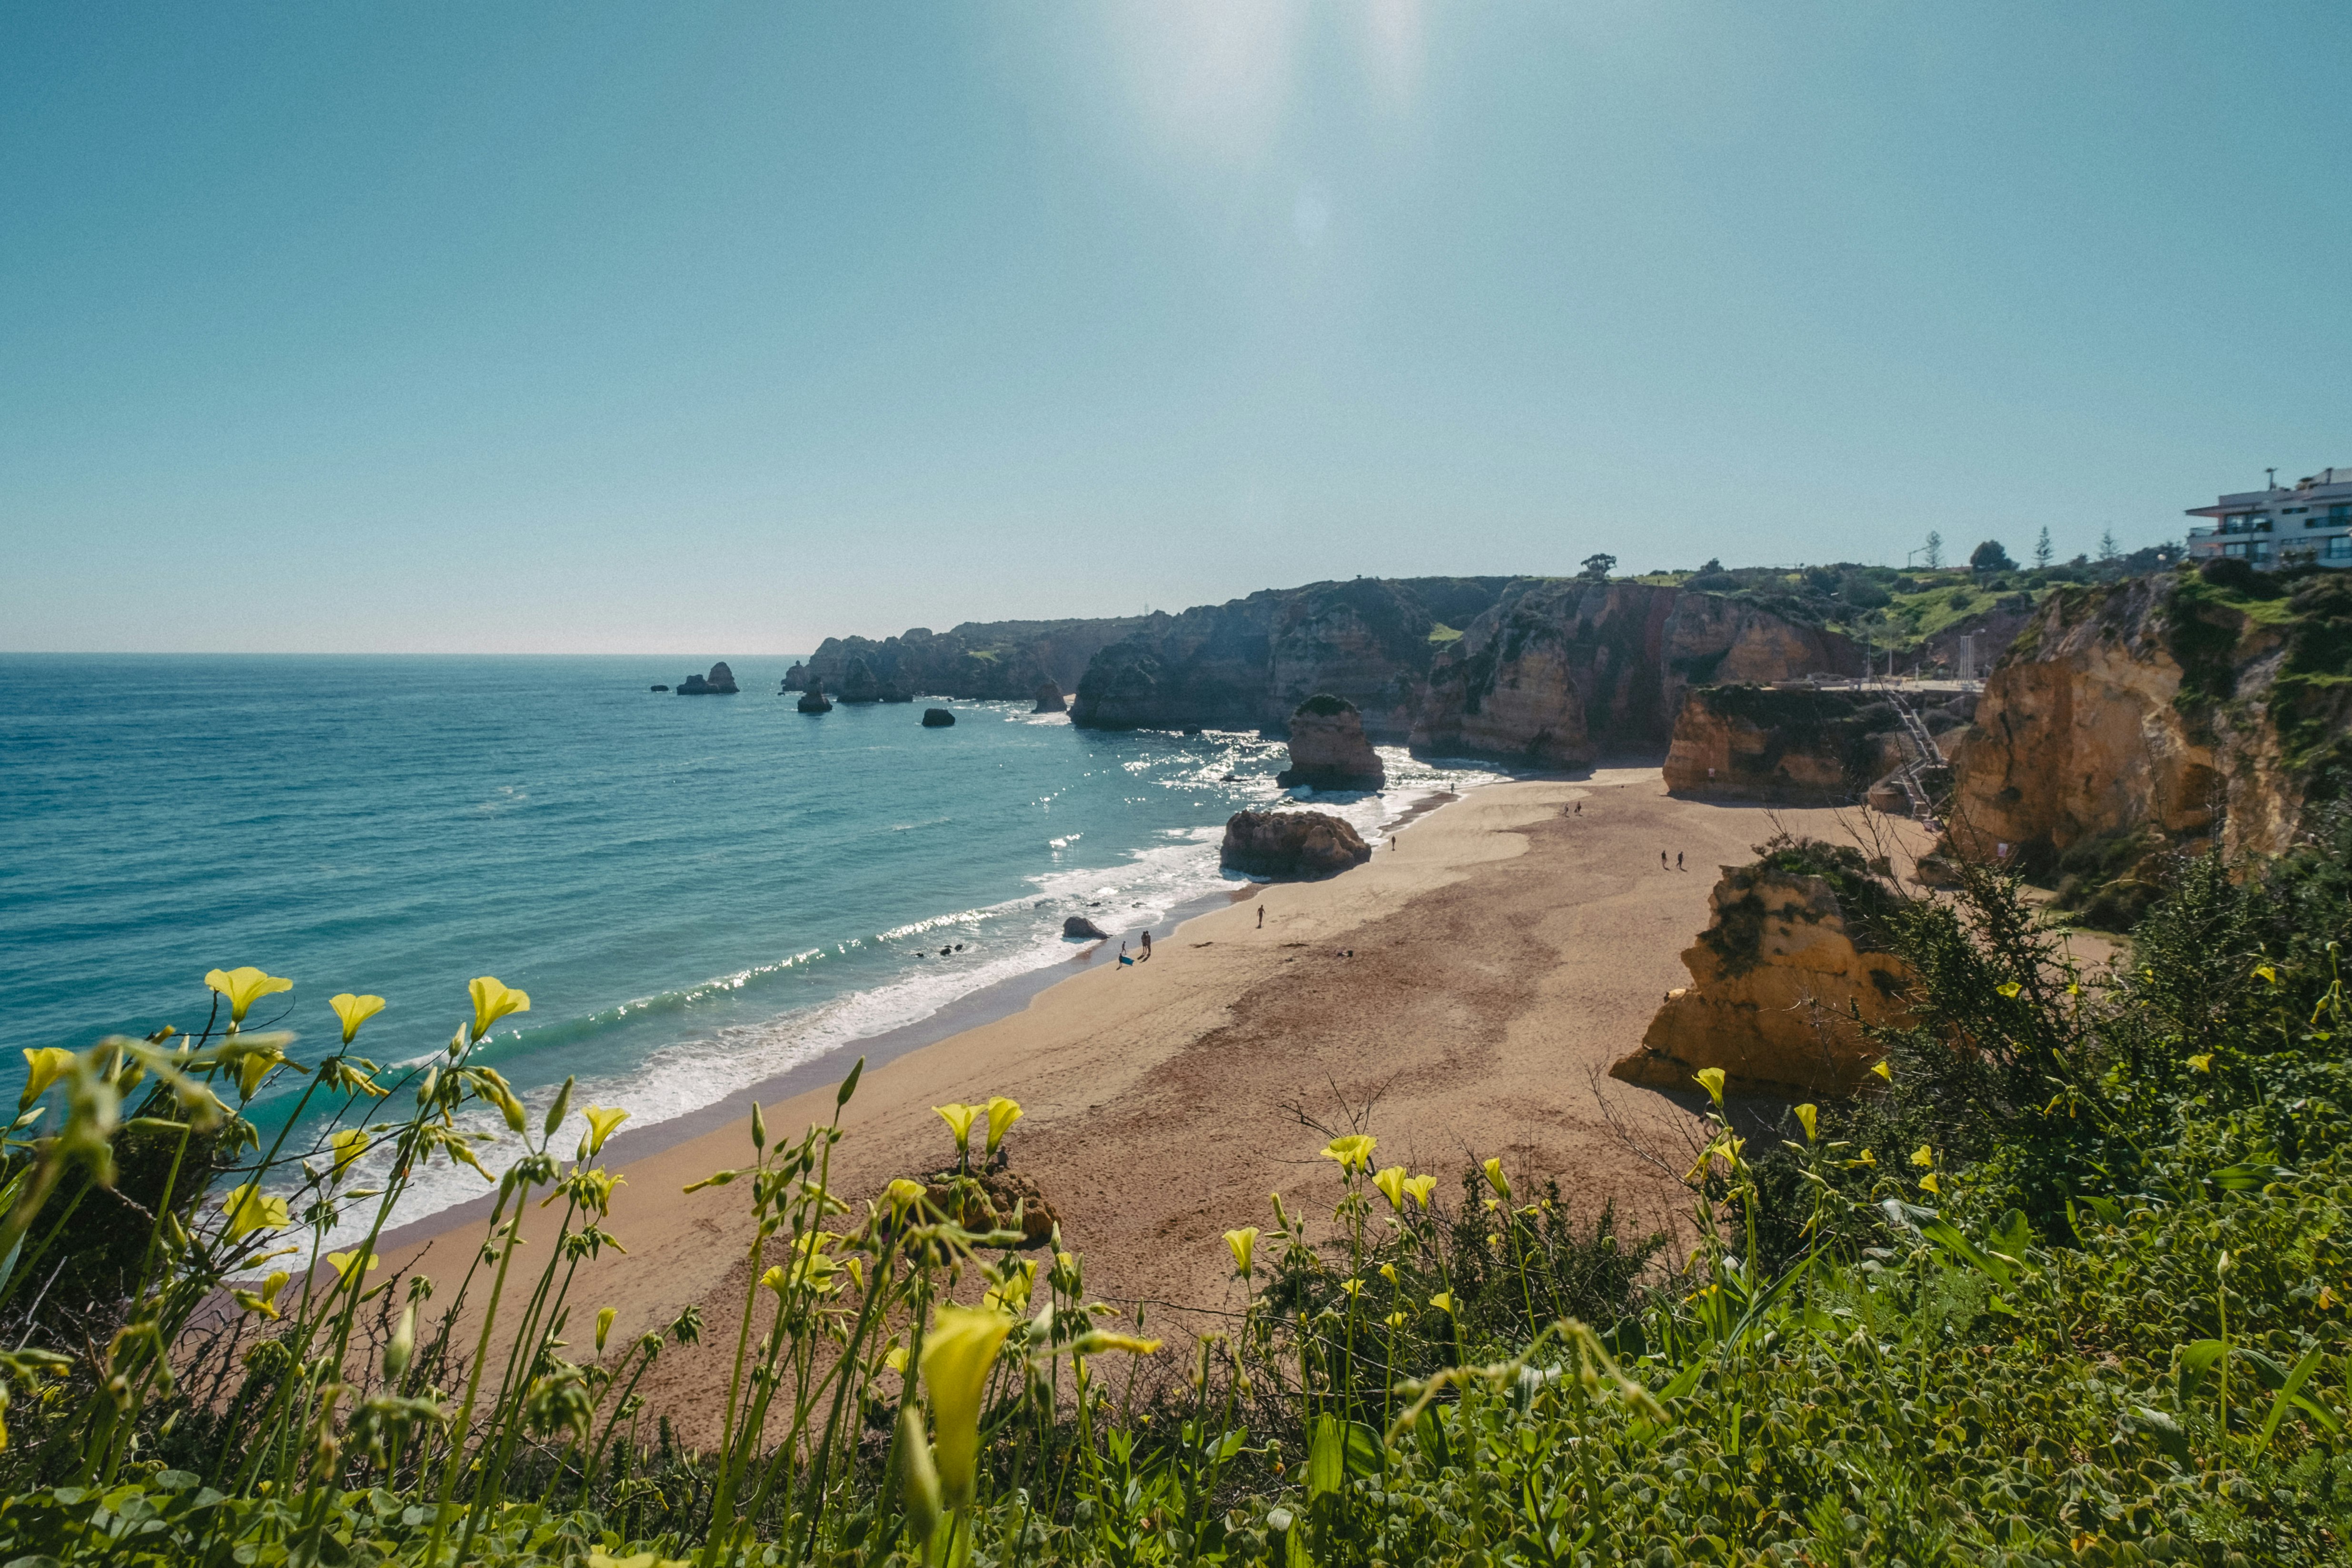 An elevated shot of Praia da Dona Ana; in the foreground are yellow wildflowers, while down below a few people stroll on the wide sandy beach which has a backdrop of curving cliffs.